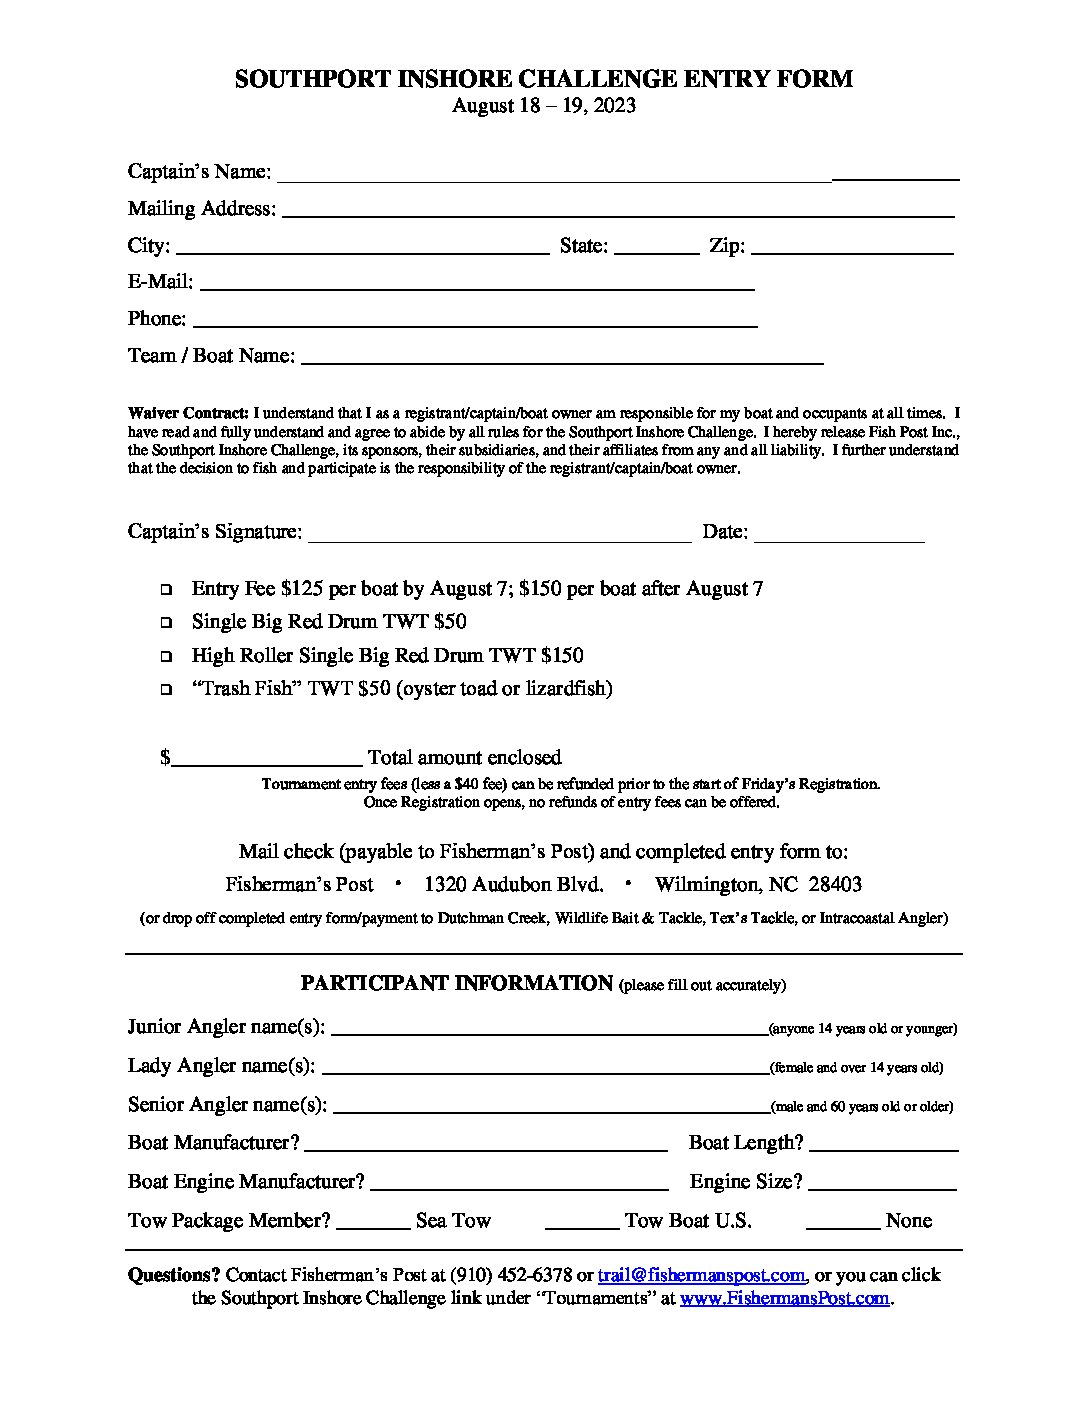 2023 Southport Inshore Challenge Print Entry Form